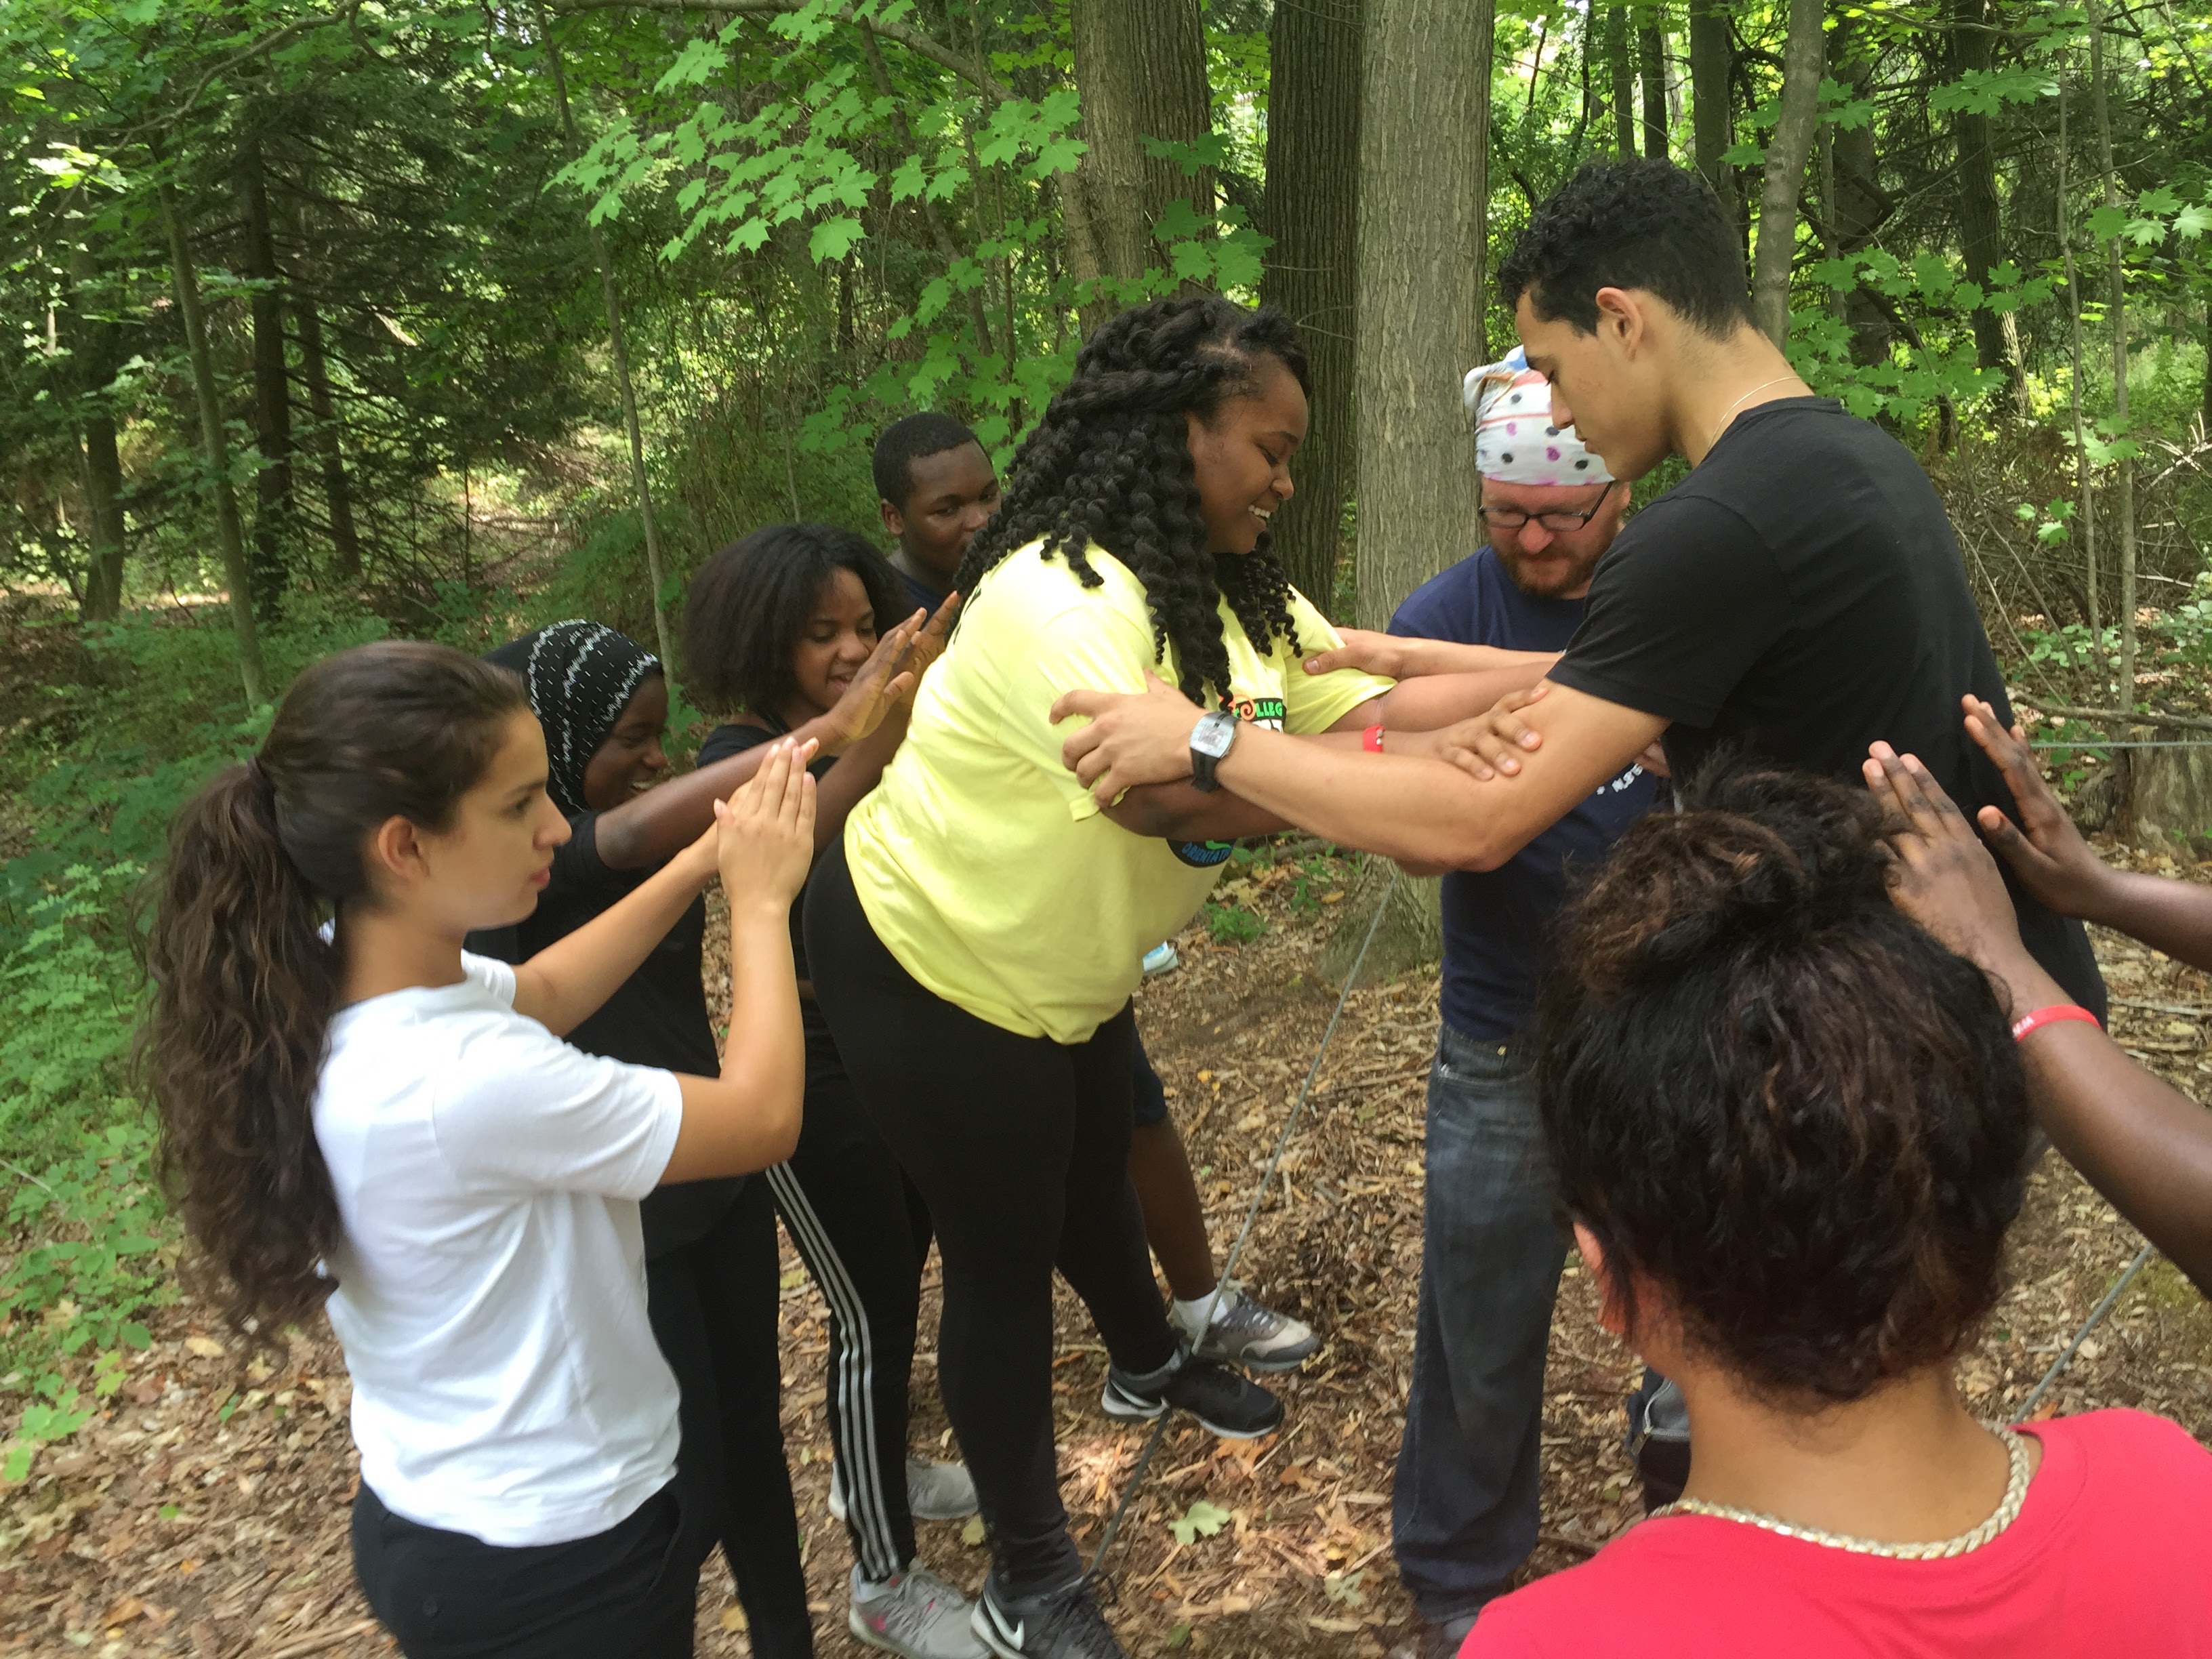 Students assisting each other in trust activities at Camp Keenan